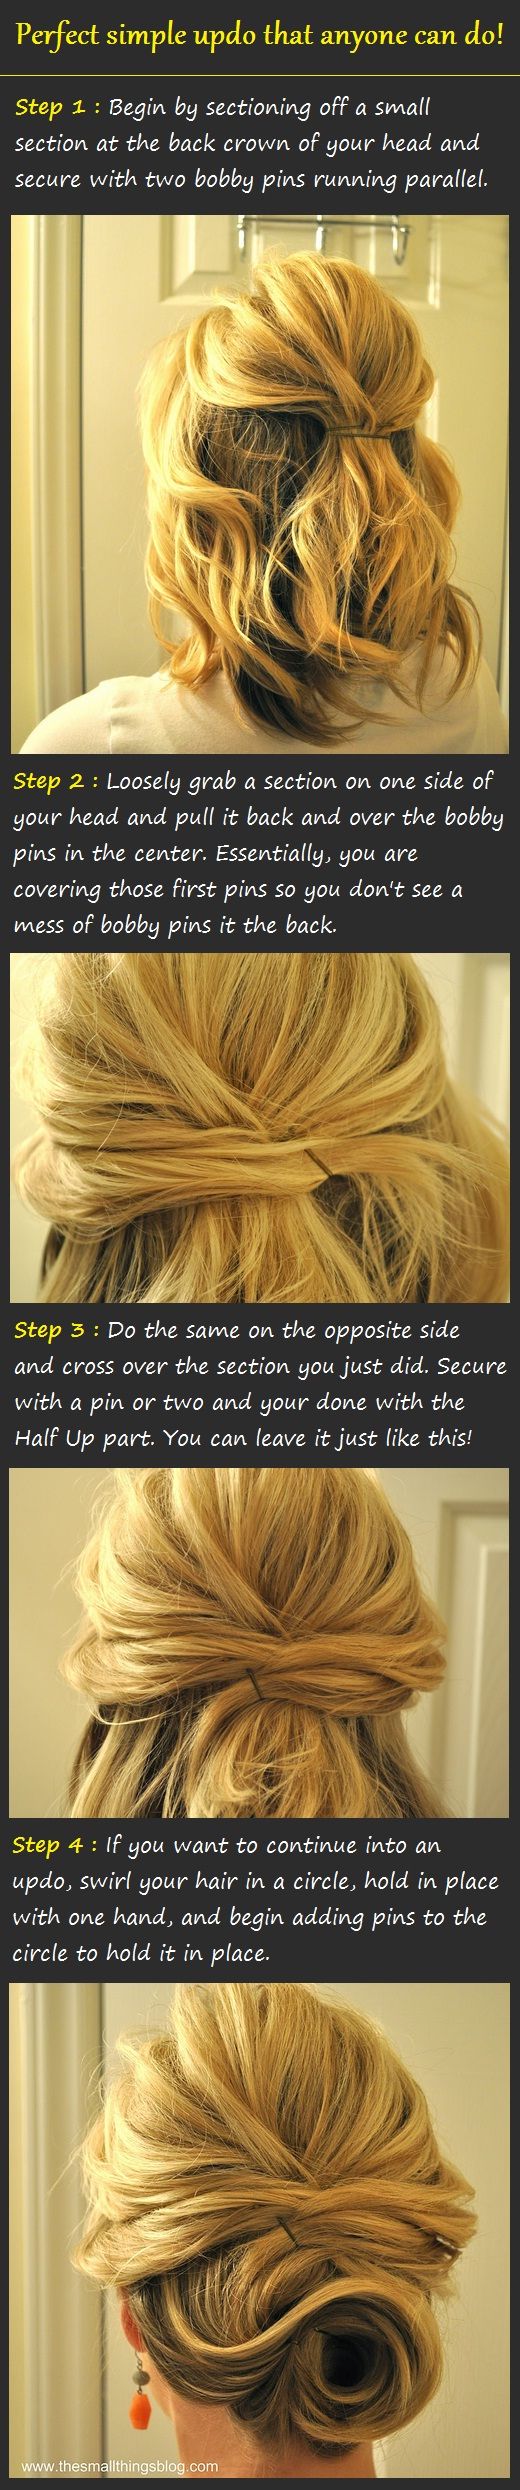 Perfect simple updo that anyone can do!